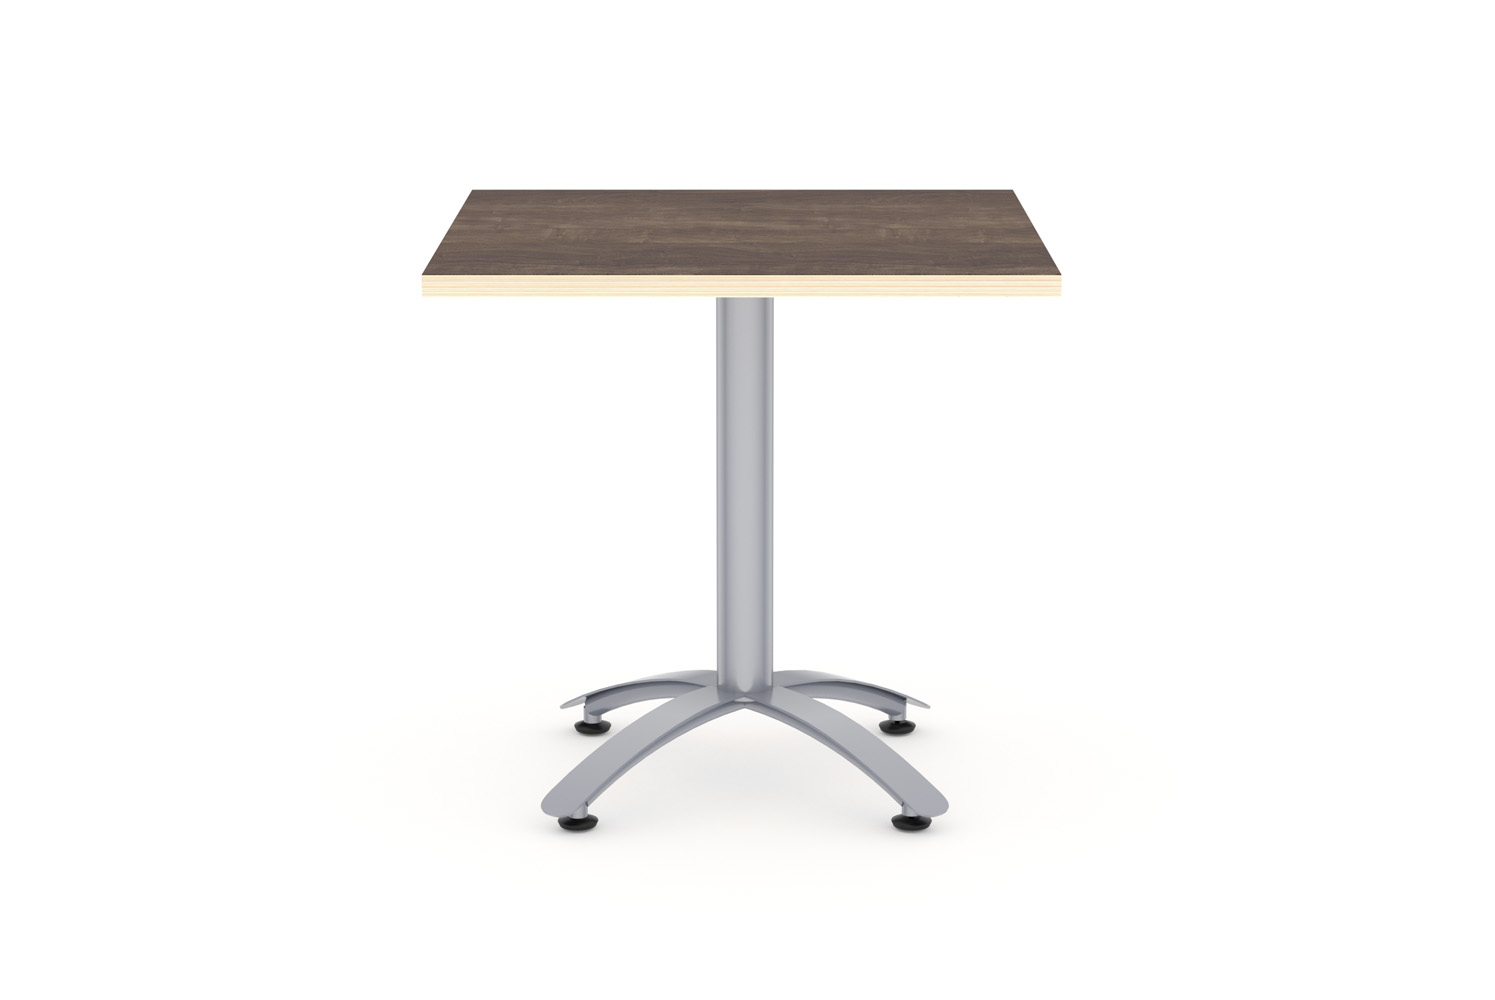 Arccos 30 inch square cafe table